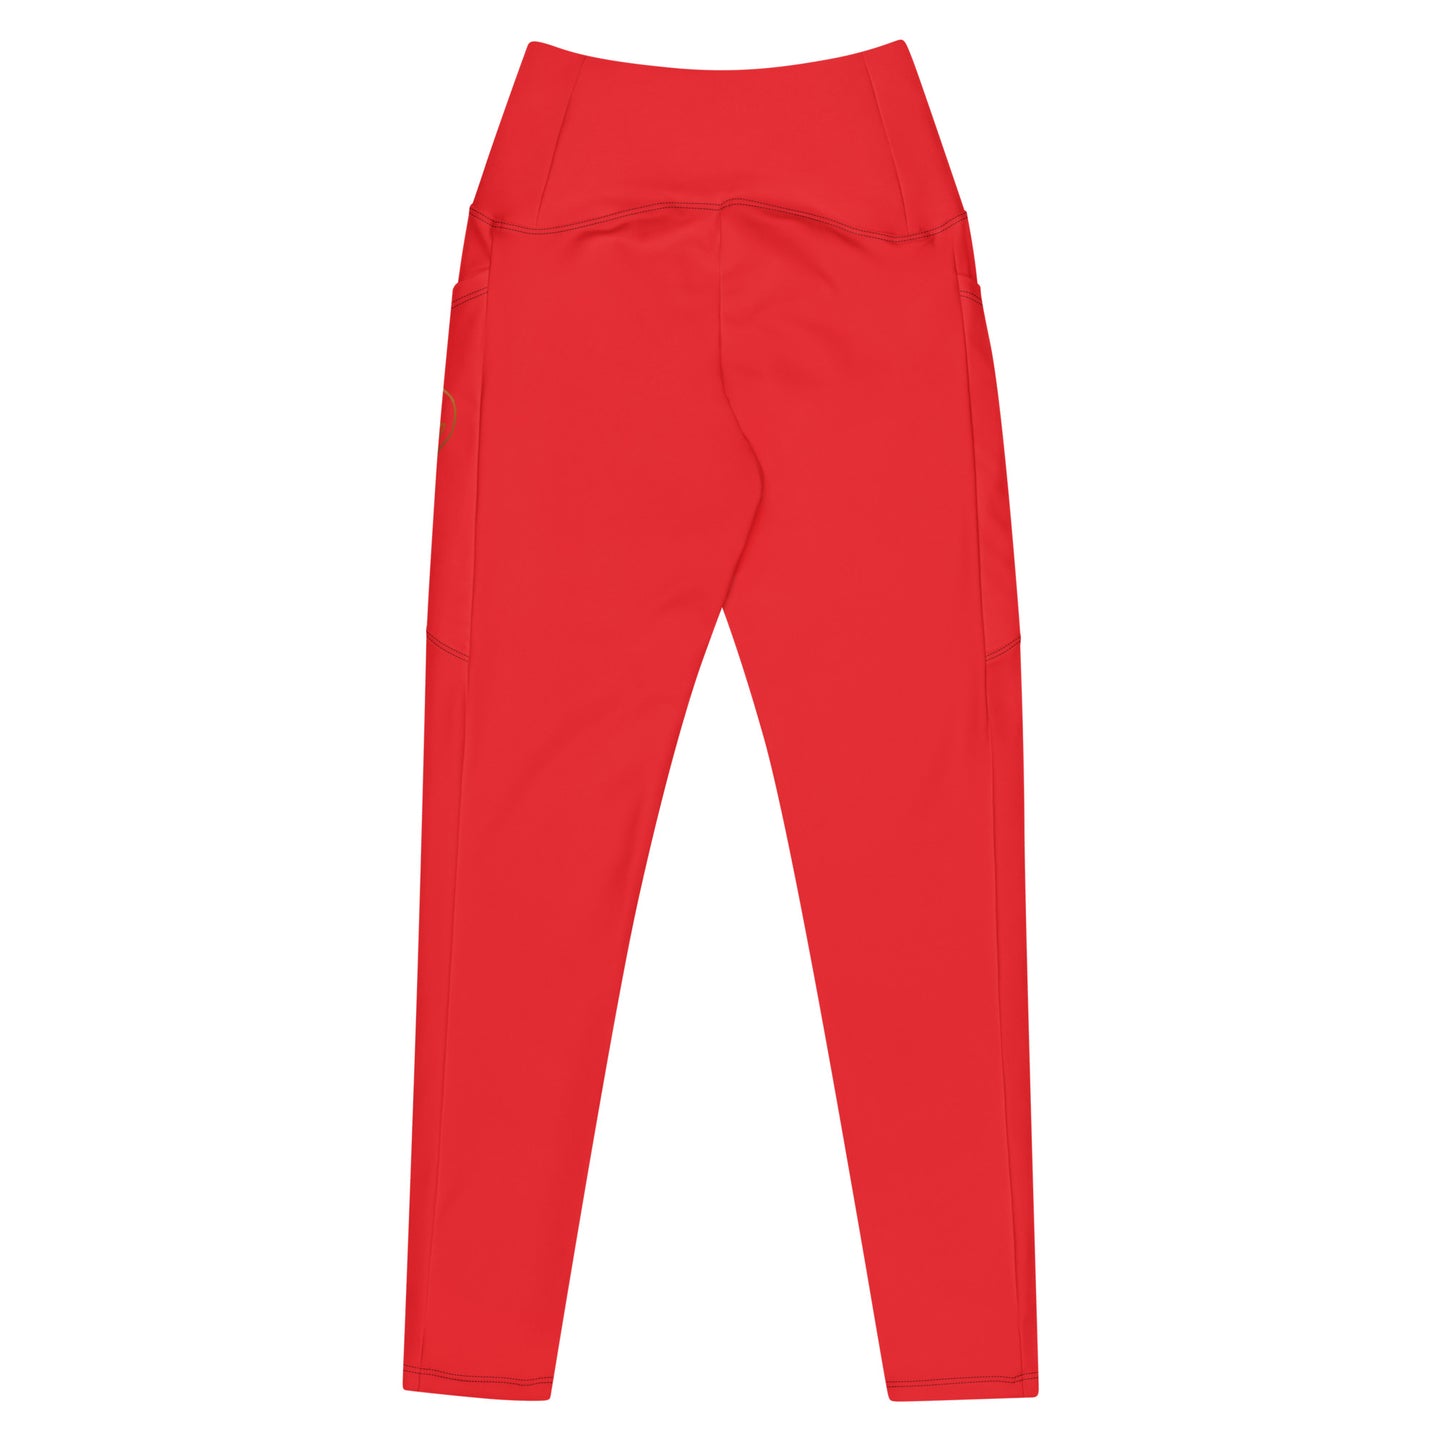 Leggings with pockets - Red